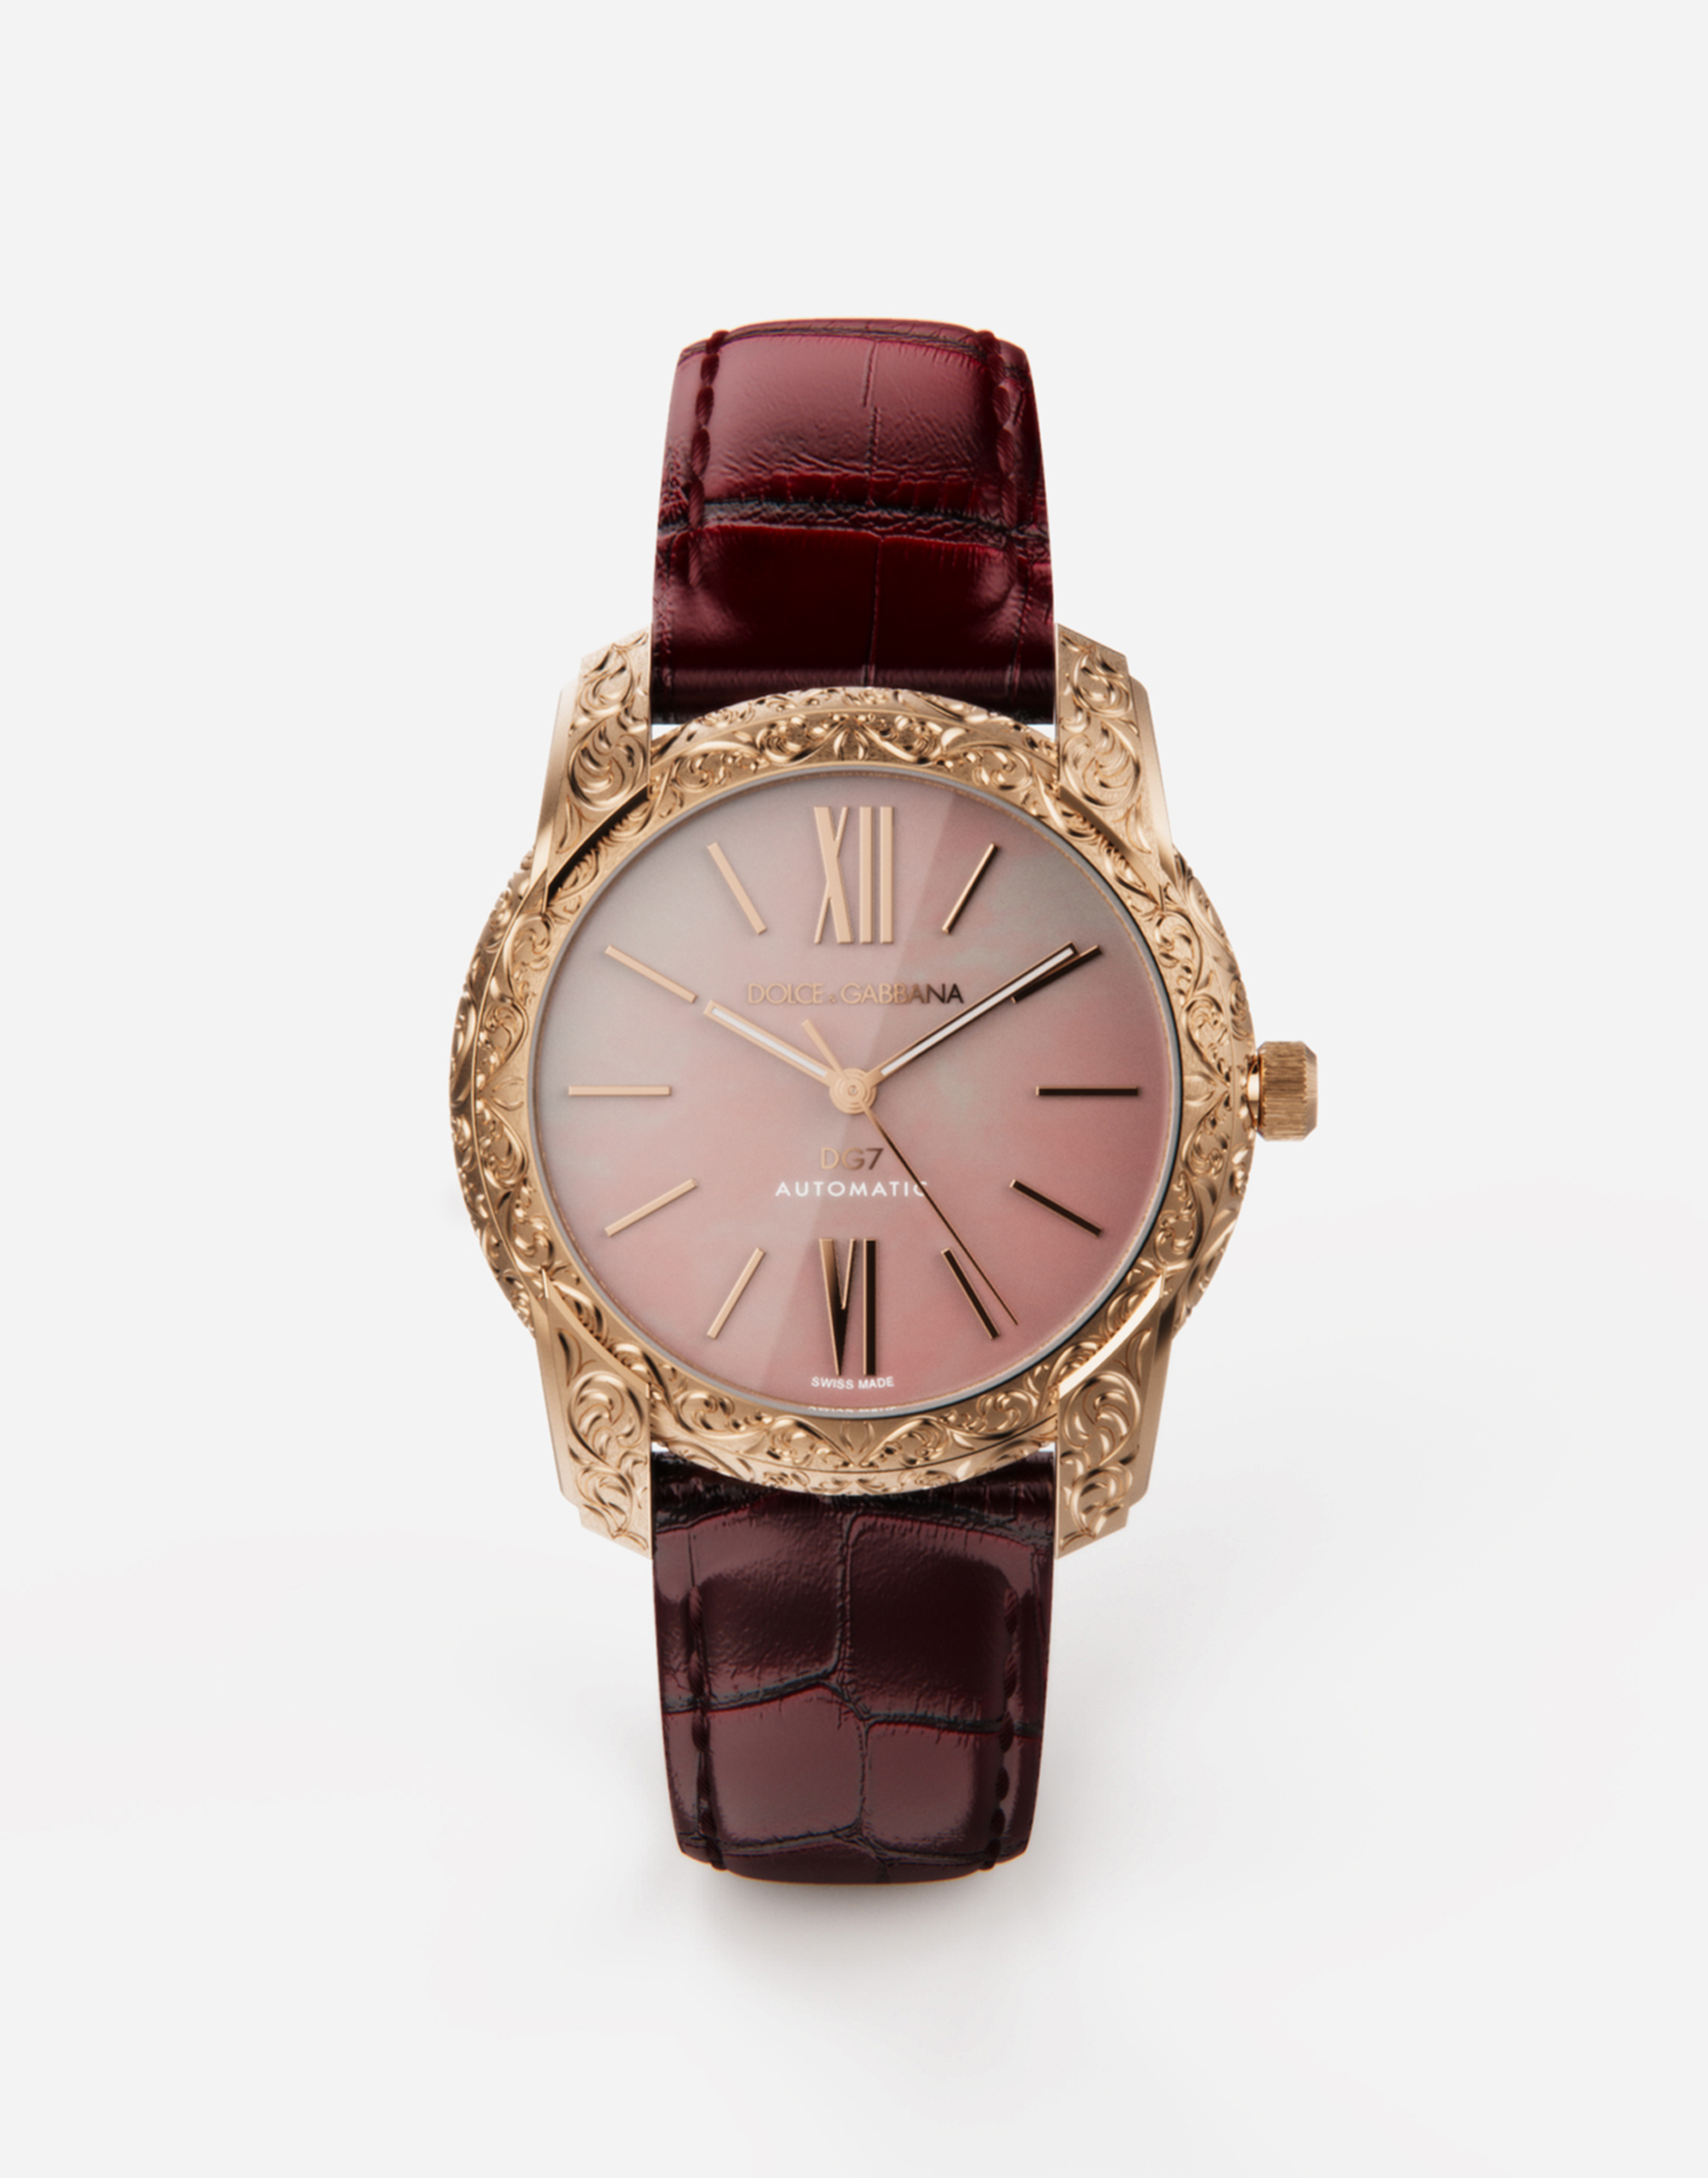 DG7 Gattopardo watch in red gold with pink mother of pearl in Bordeaux